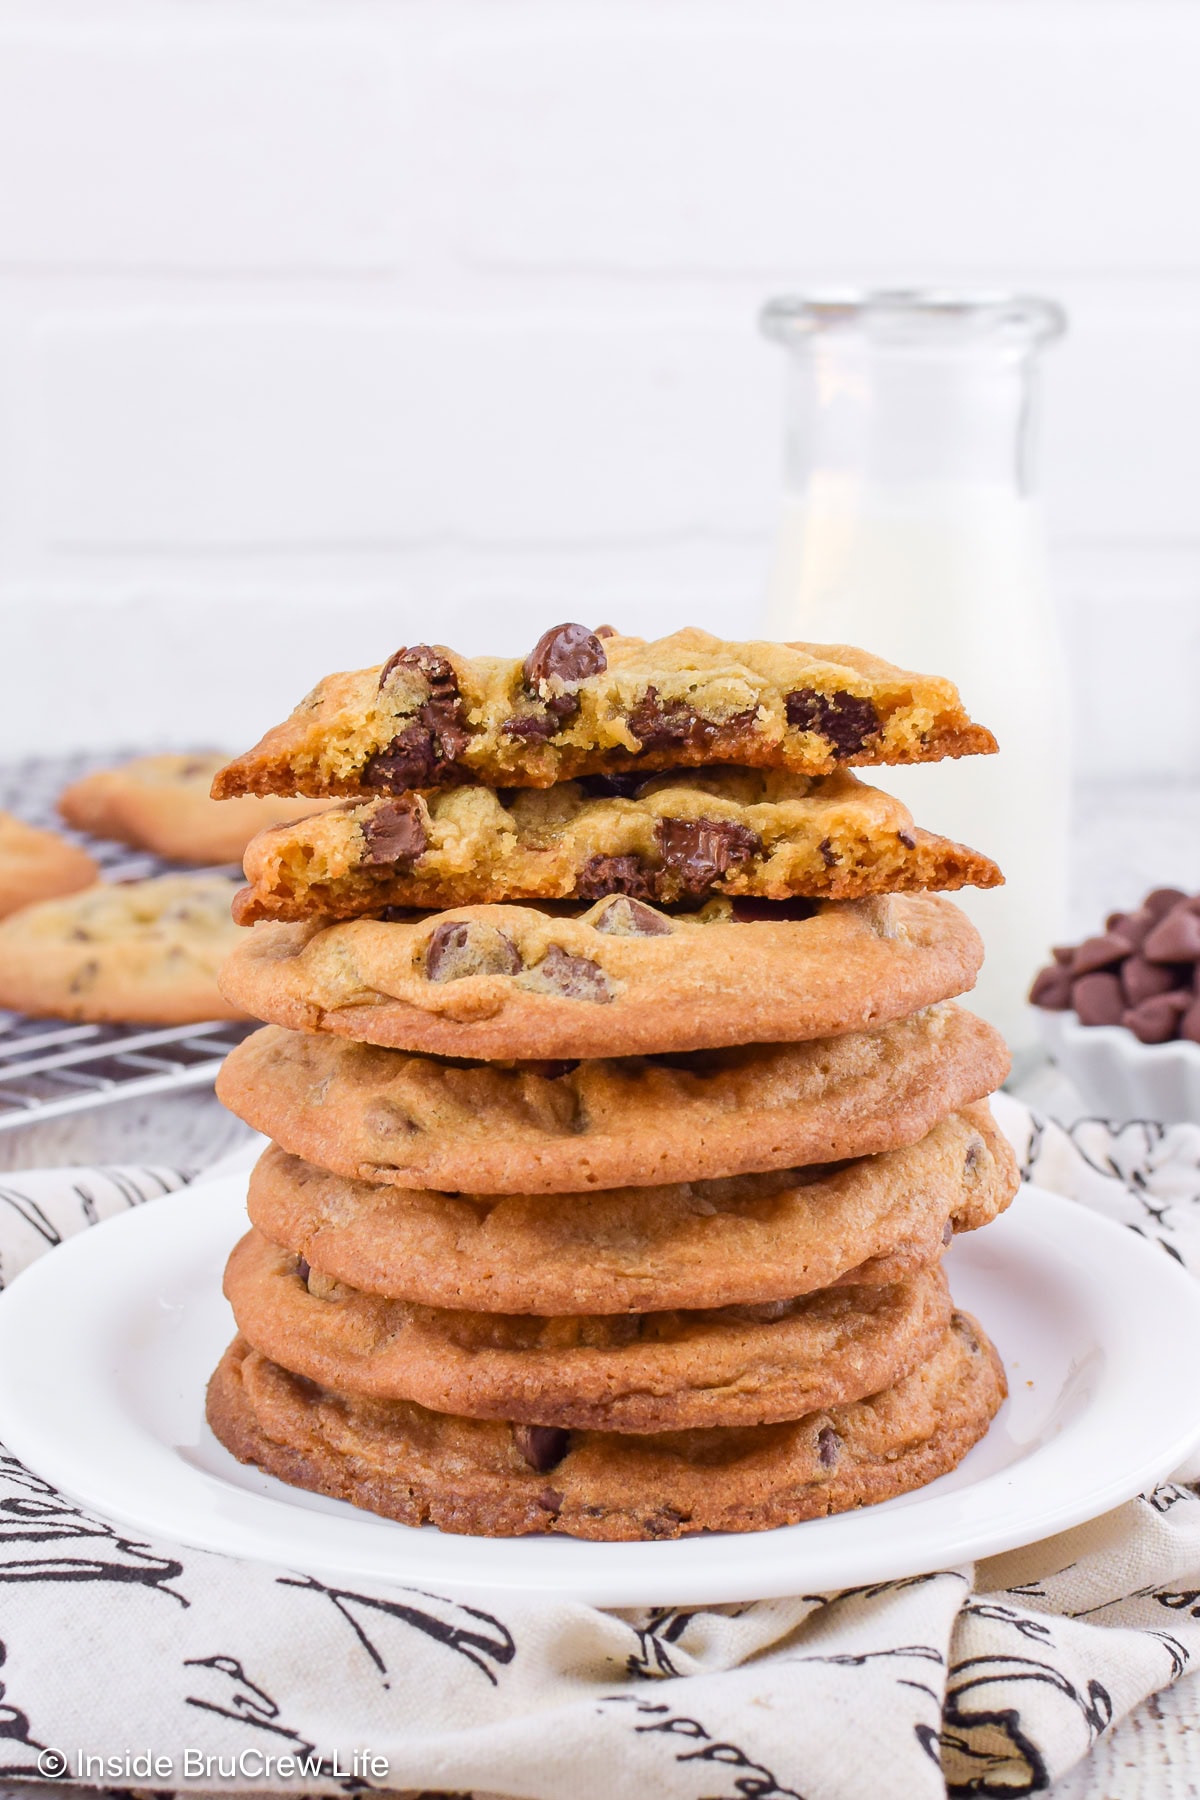 Chocolate chip cookies stacked on a white plate.